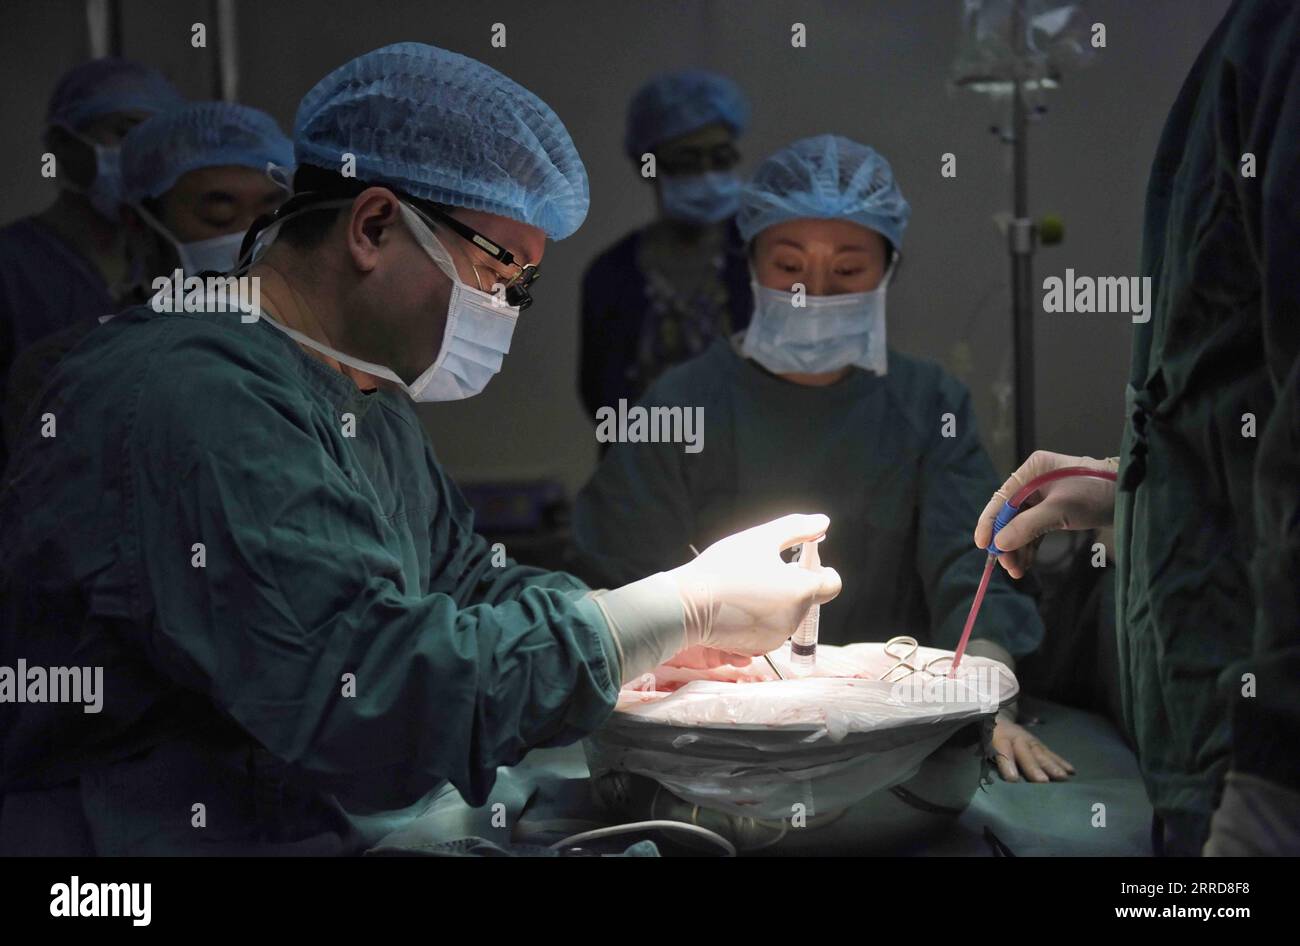 211210 -- CHENGDU, Dec. 10, 2021 -- Wang Wentao L uses the technology of extracorporeal hepatectomy plus liver autotransplantation in the treatment of a hydatid disease patient at a hospital in Tibetan Autonomous Prefecture of Garze, southwest China s Sichuan Province, Jan. 16, 2020. Wang Wentao, deputy director of the liver surgery department at West China Hospital of Sichuan University, started his work on the prevention and control of hydatid disease in Tibetan Autonomous Prefecture of Garze in 2006 when he learned that some local people suffer from hydatid disease during one of his free cl Stock Photo